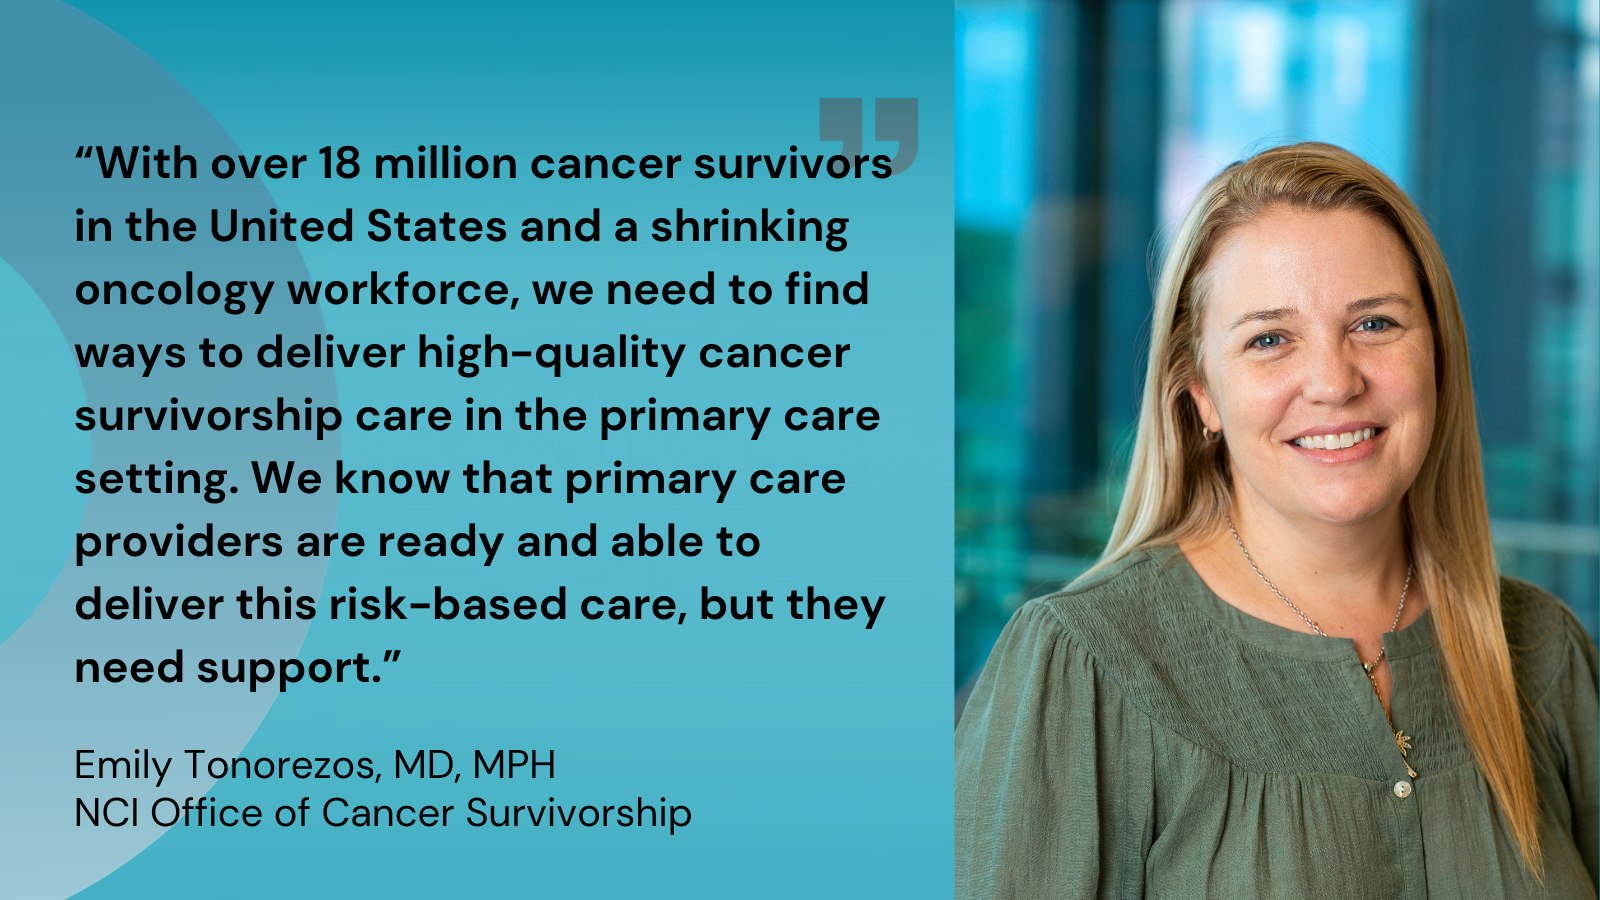 Quote 1. With over 18 million cancer survivors in the United States and a shrinking oncology workforce, we need to find ways to deliver high-quality cancer survivorship care in the primary care setting. We know that primary care providers are ready and able to deliver this risk-based care, but they need support. Emily Tonorezos, MD, MPH, NCI Office of Cancer Survivorship